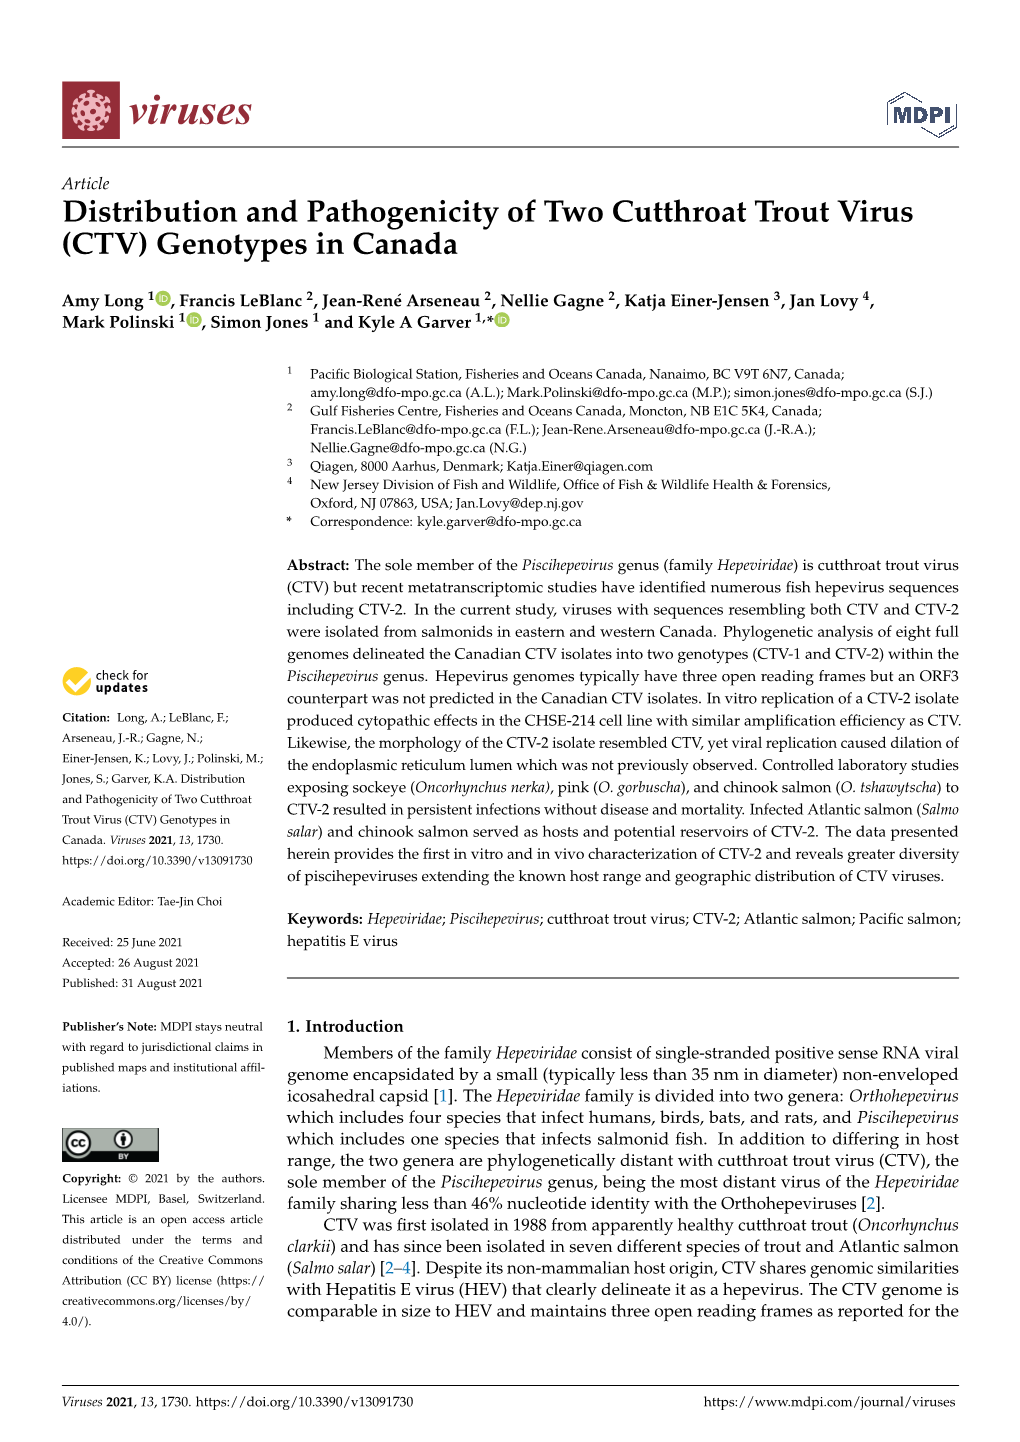 Distribution and Pathogenicity of Two Cutthroat Trout Virus (CTV) Genotypes in Canada